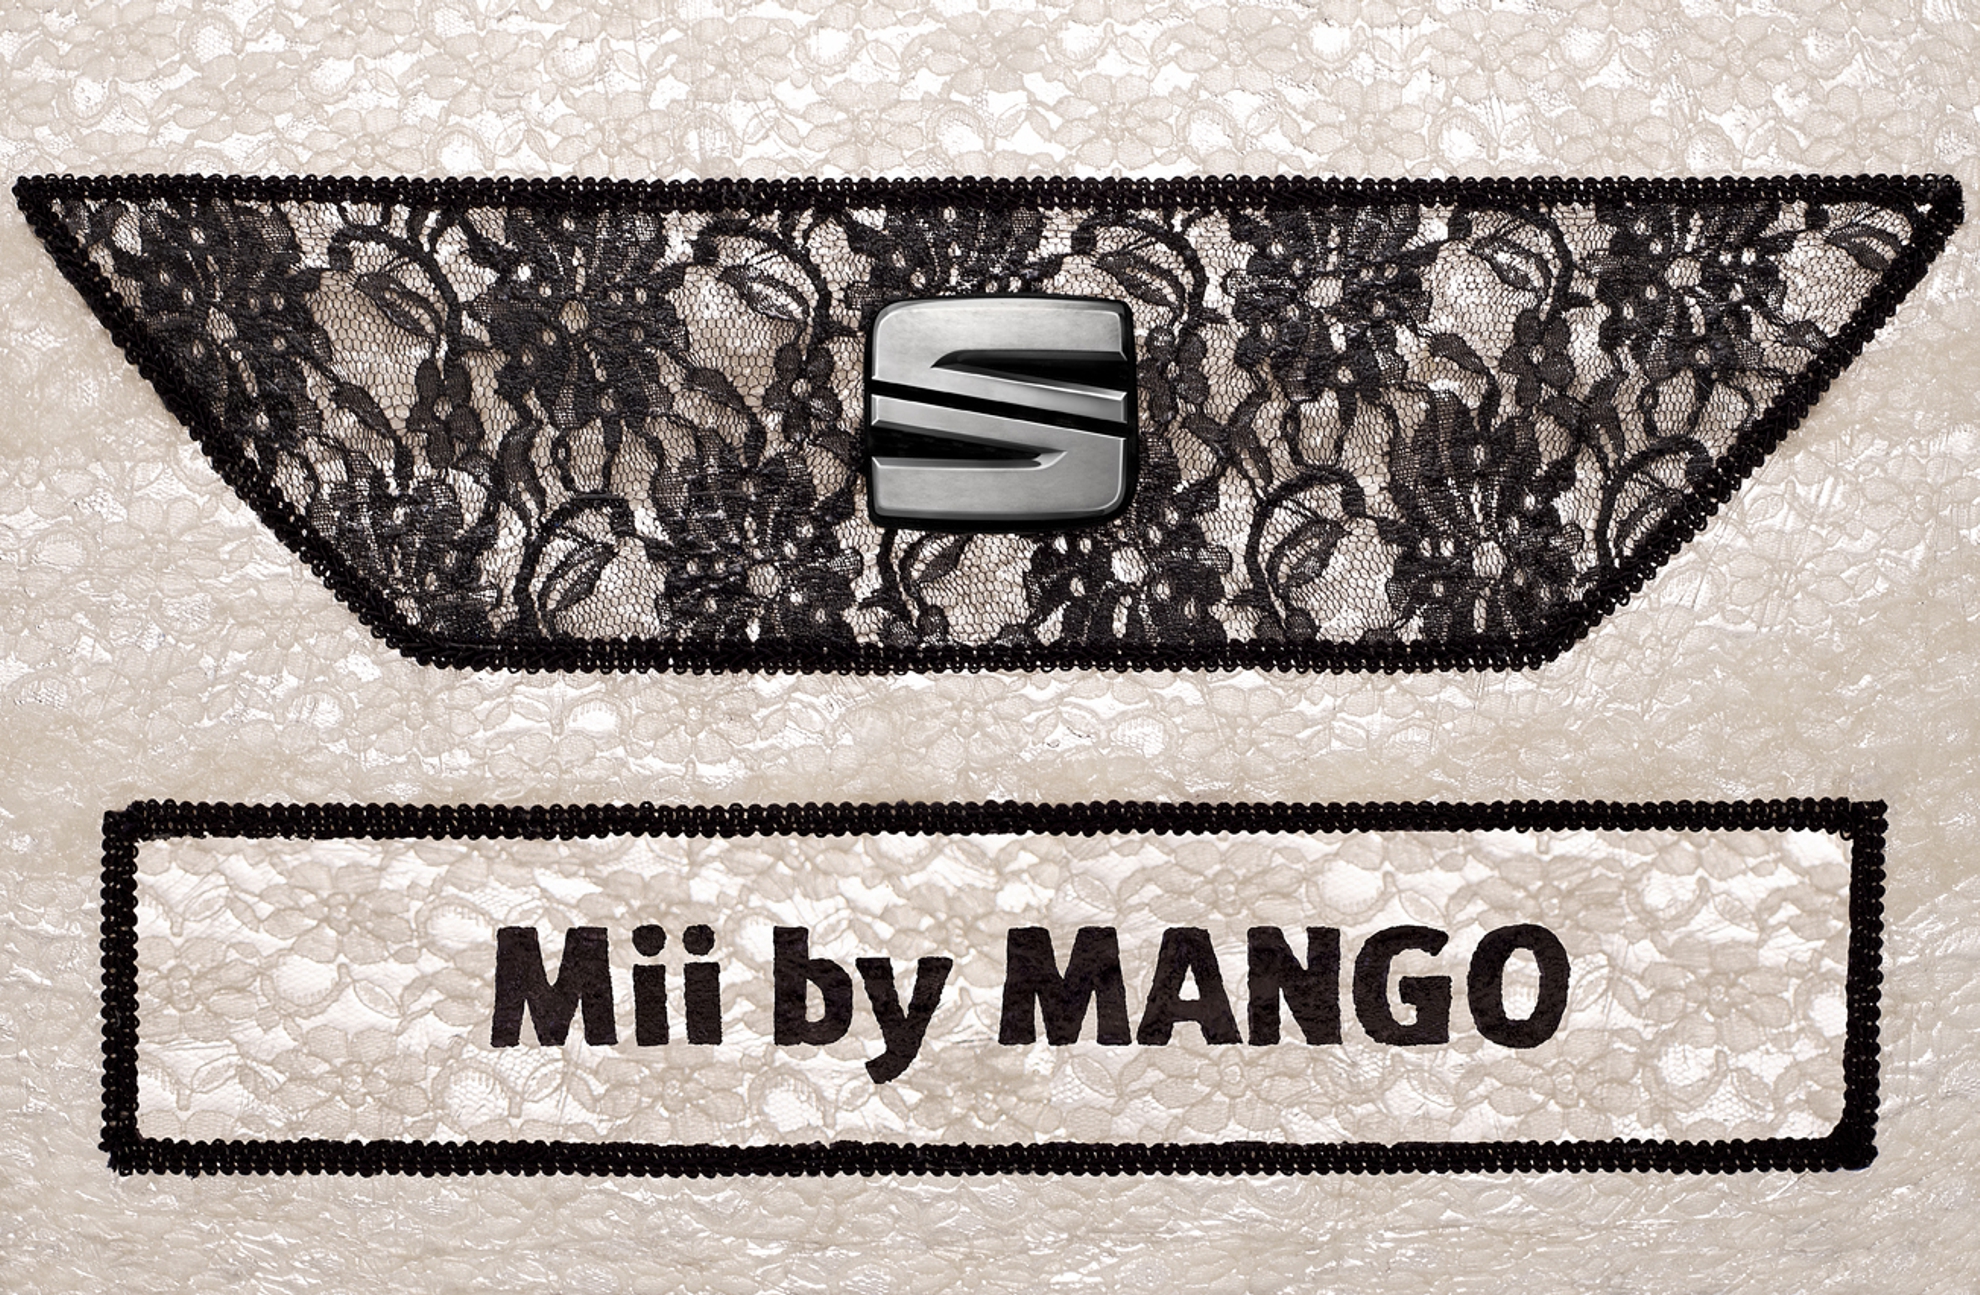 Full size lace replica of SEAT’s Mii by MANGO city car